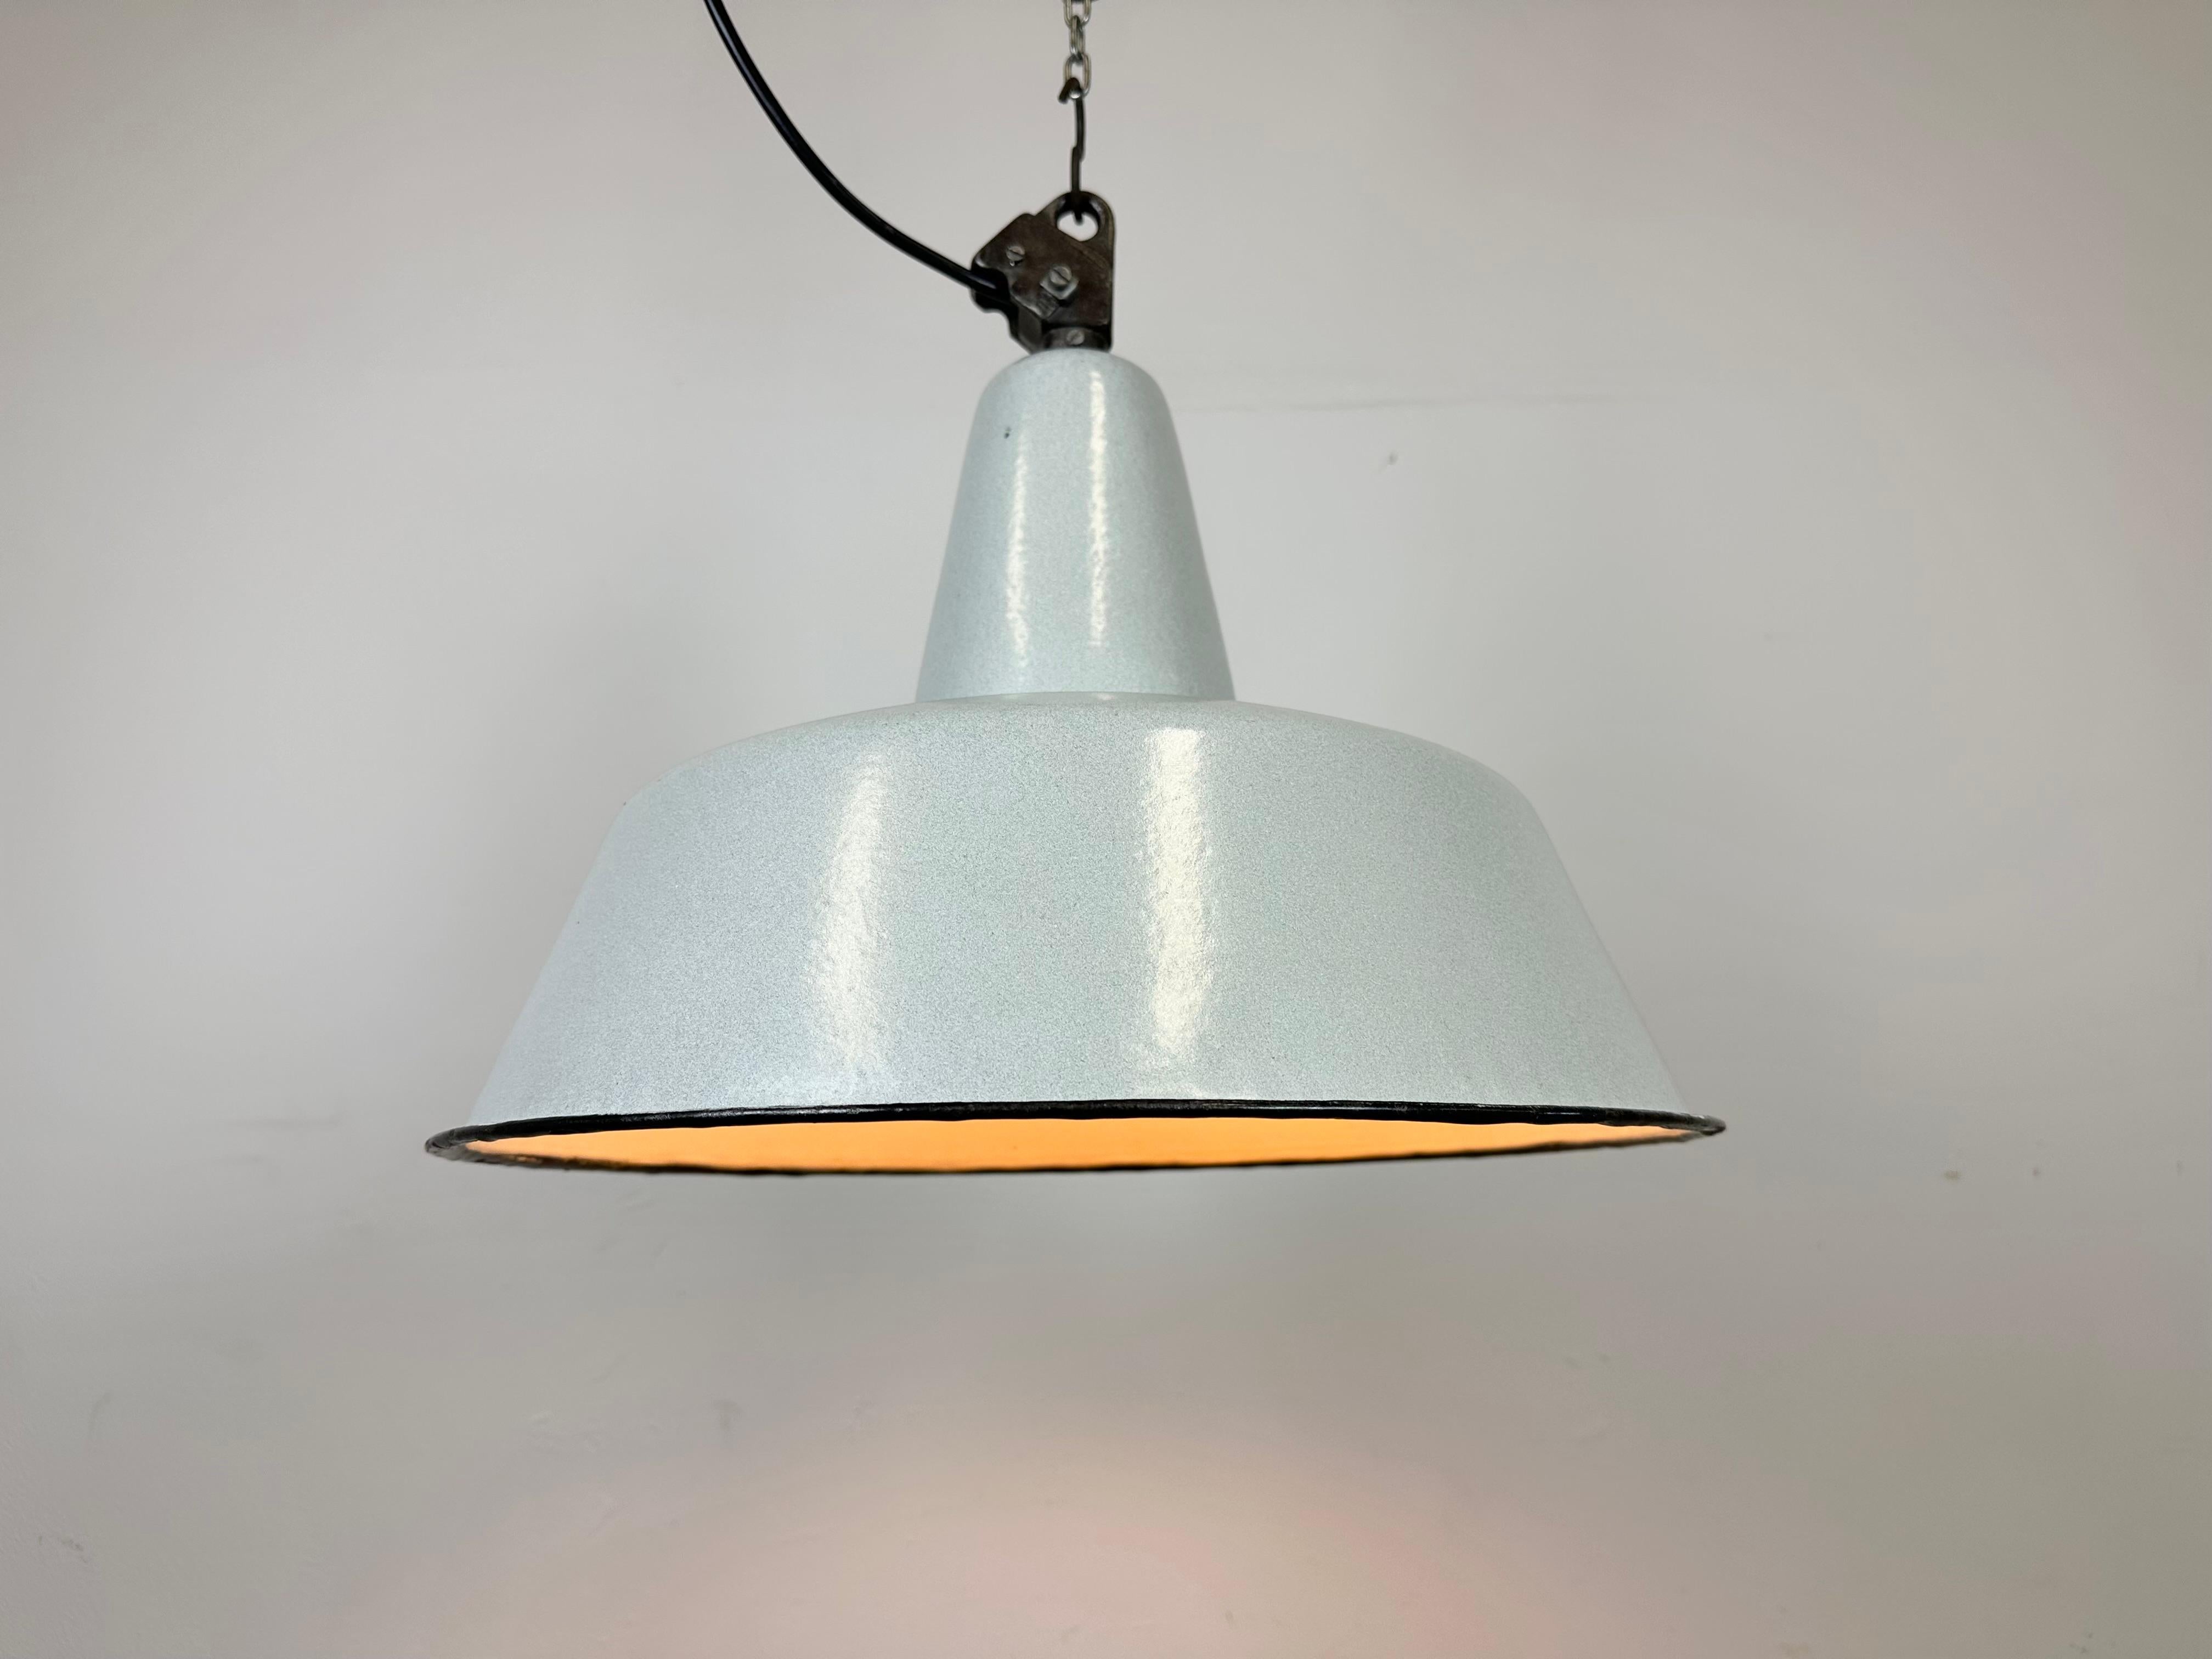 Large Industrial Grey Enamel Factory Pendant Lamp from Zaos, 1960s For Sale 4